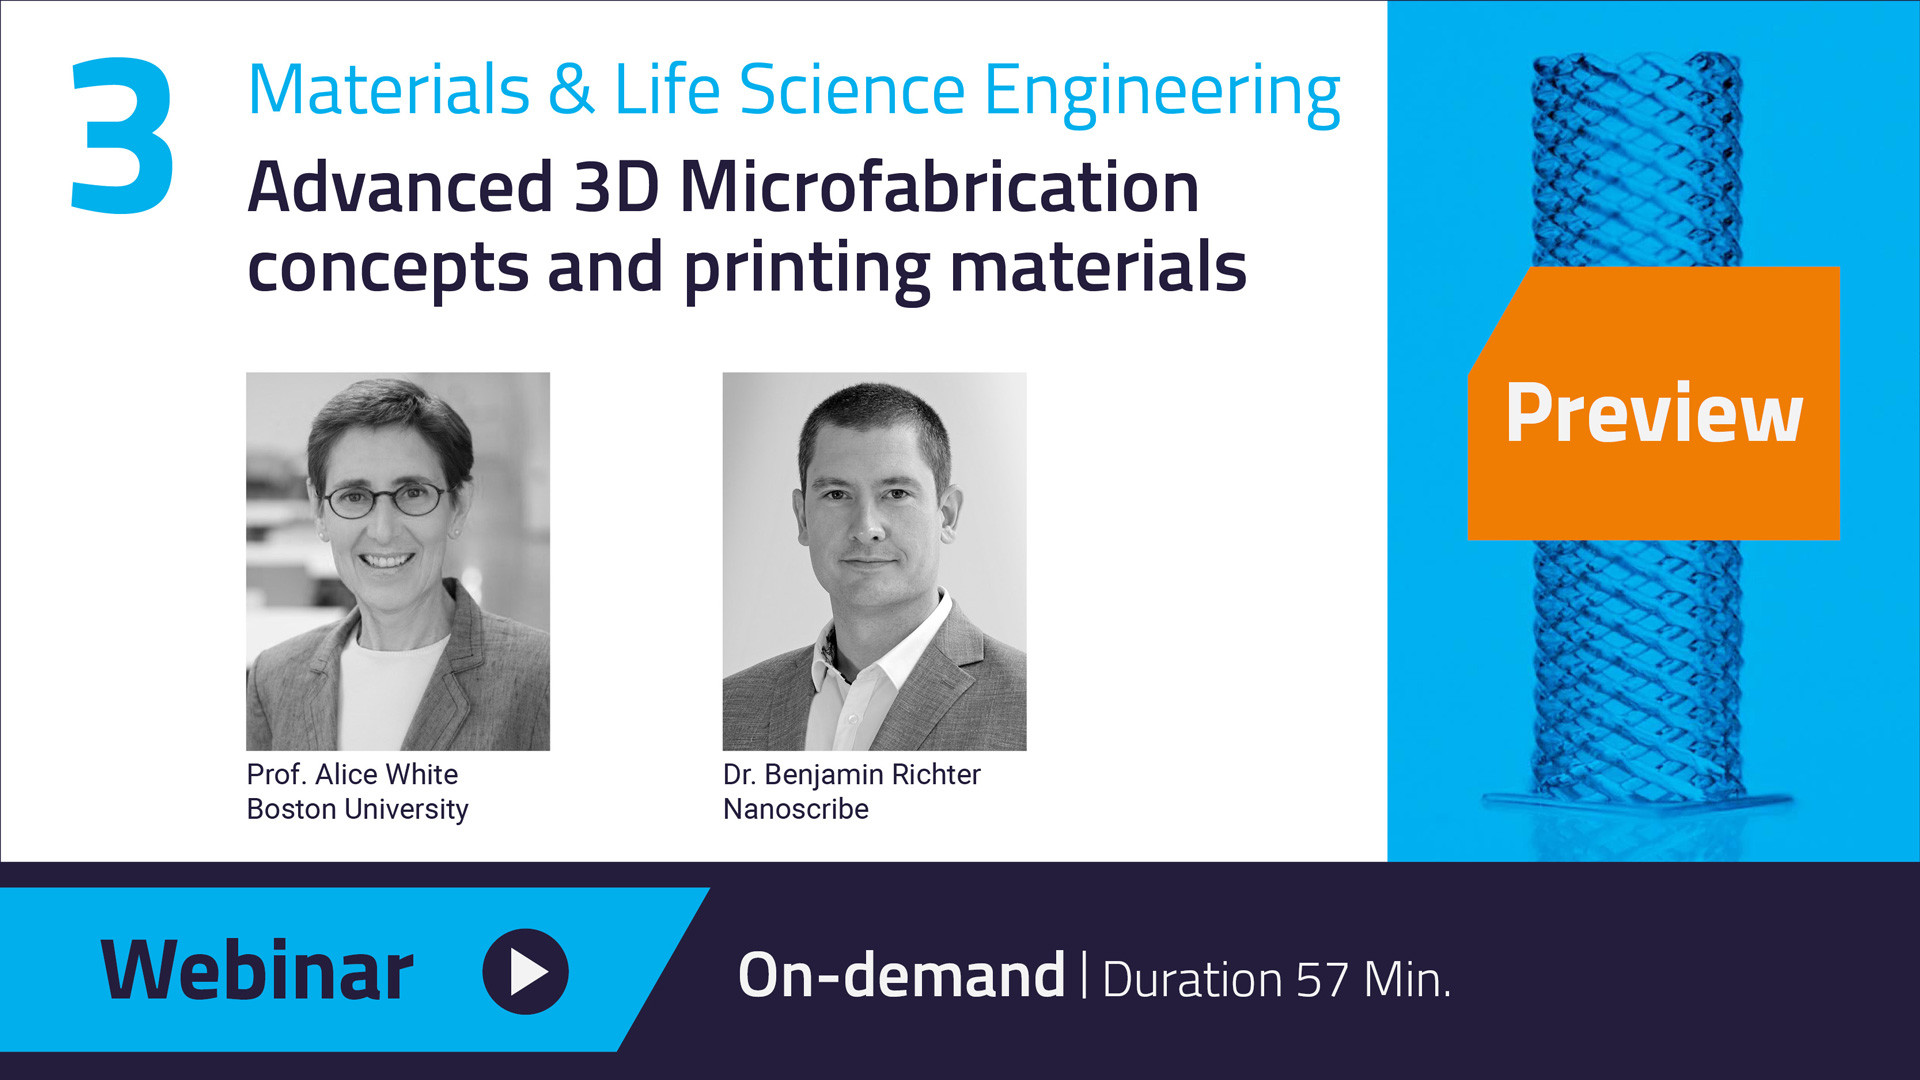 Our Webinar on Materials & Life Science Engineering is now available on-demand - watch the webinar here